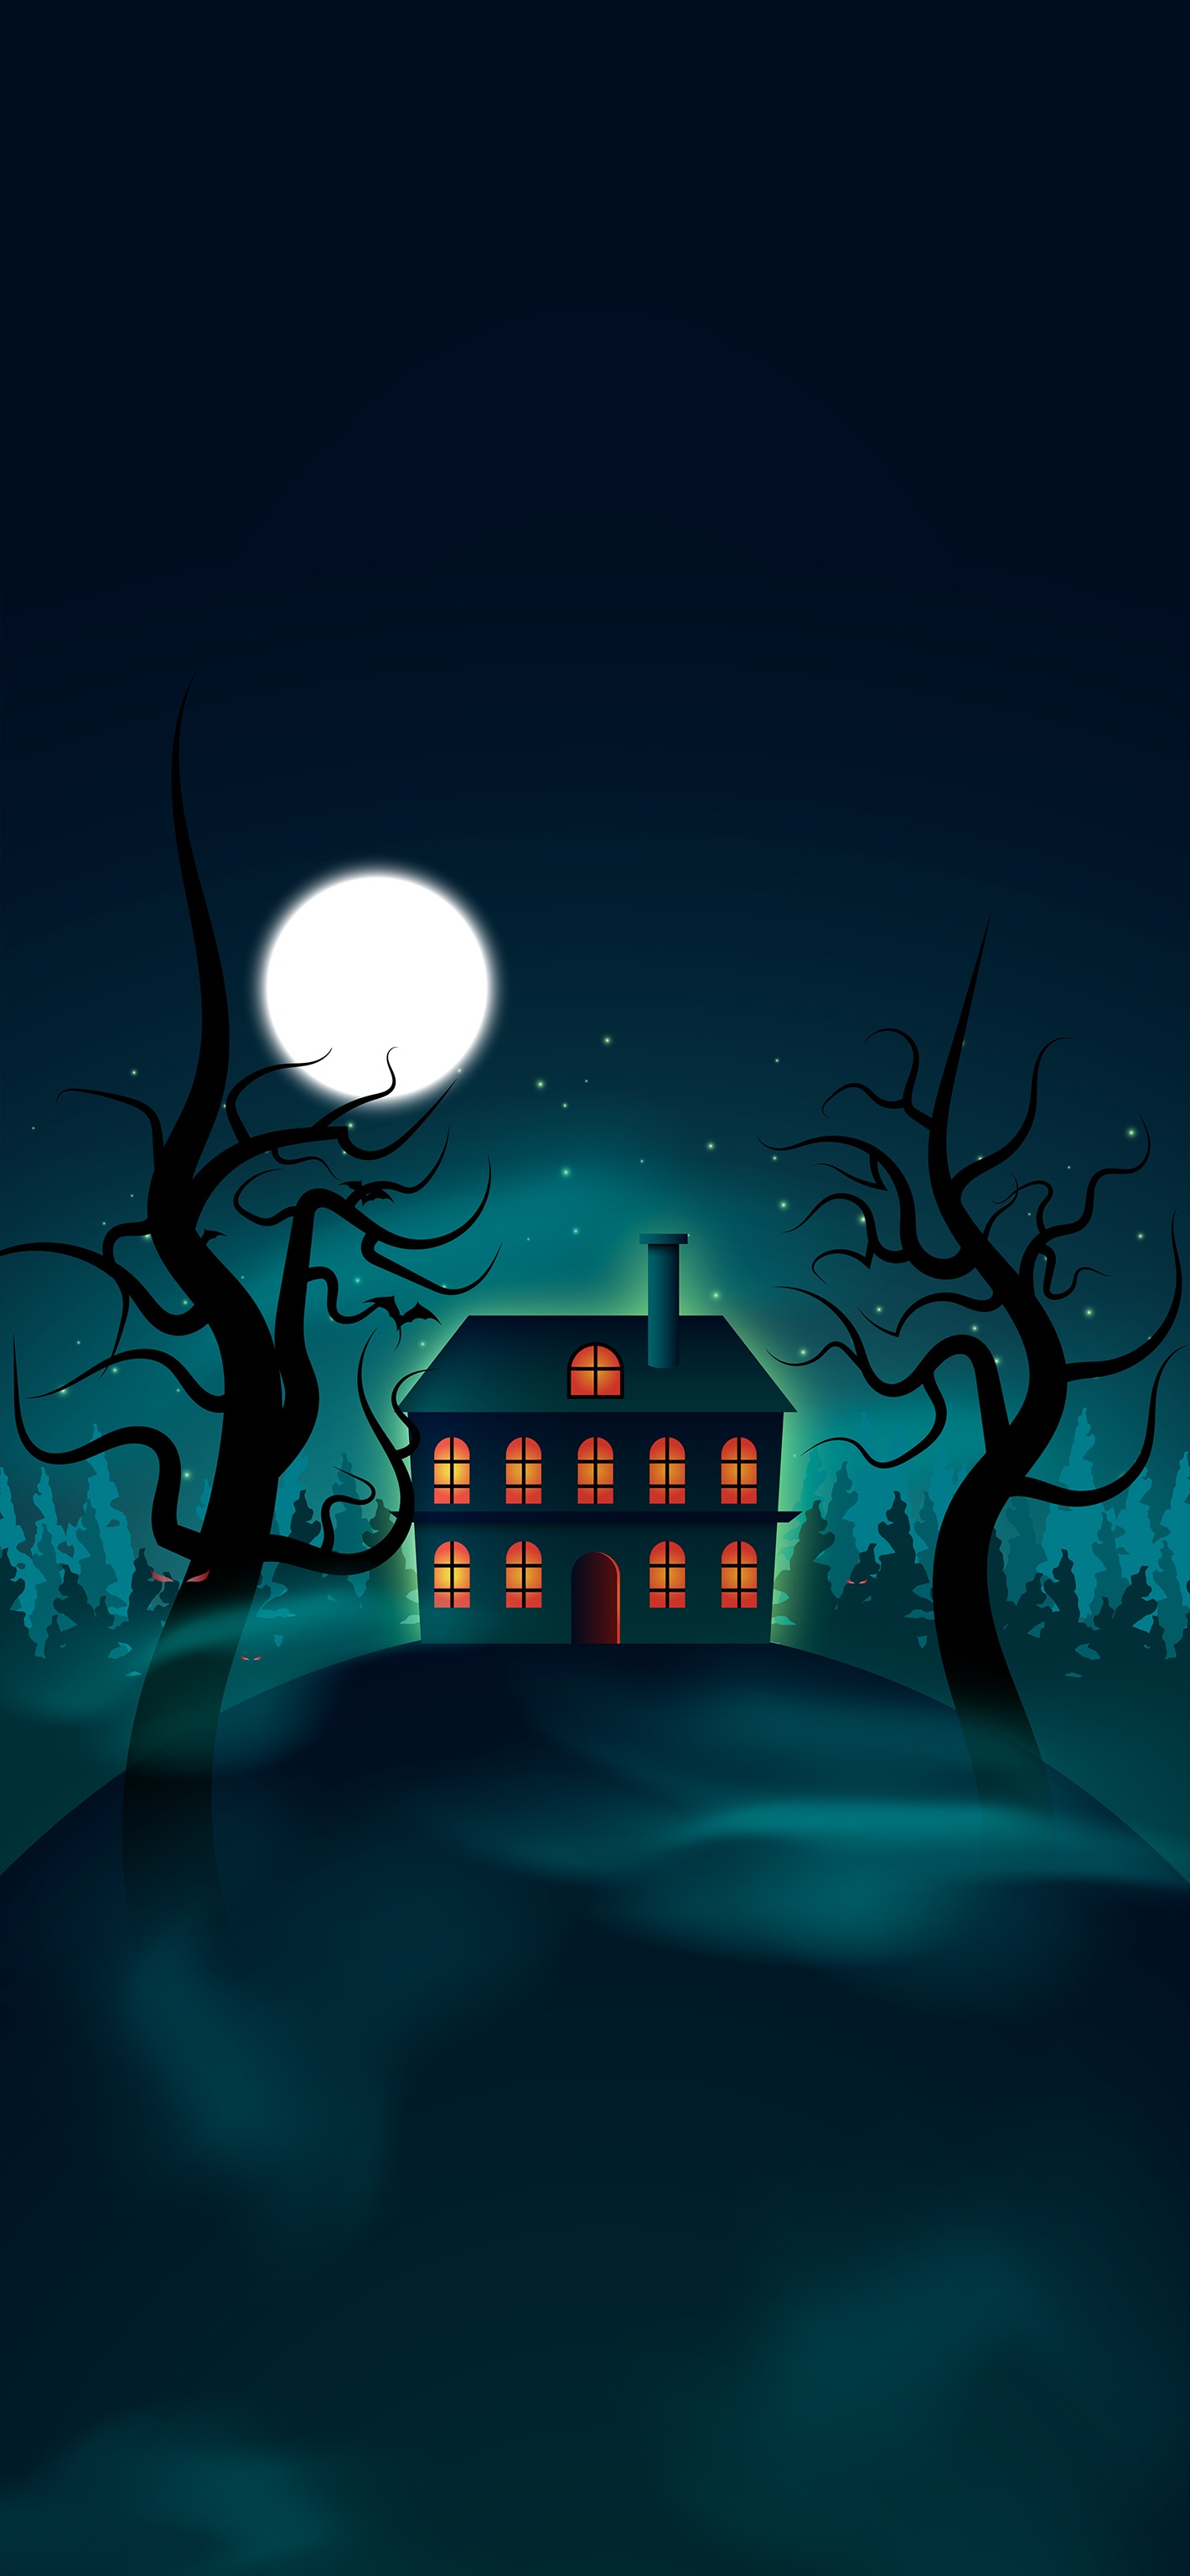 Funny, Spooky & Happy Halloween Wallpaper For iPhone (2020)